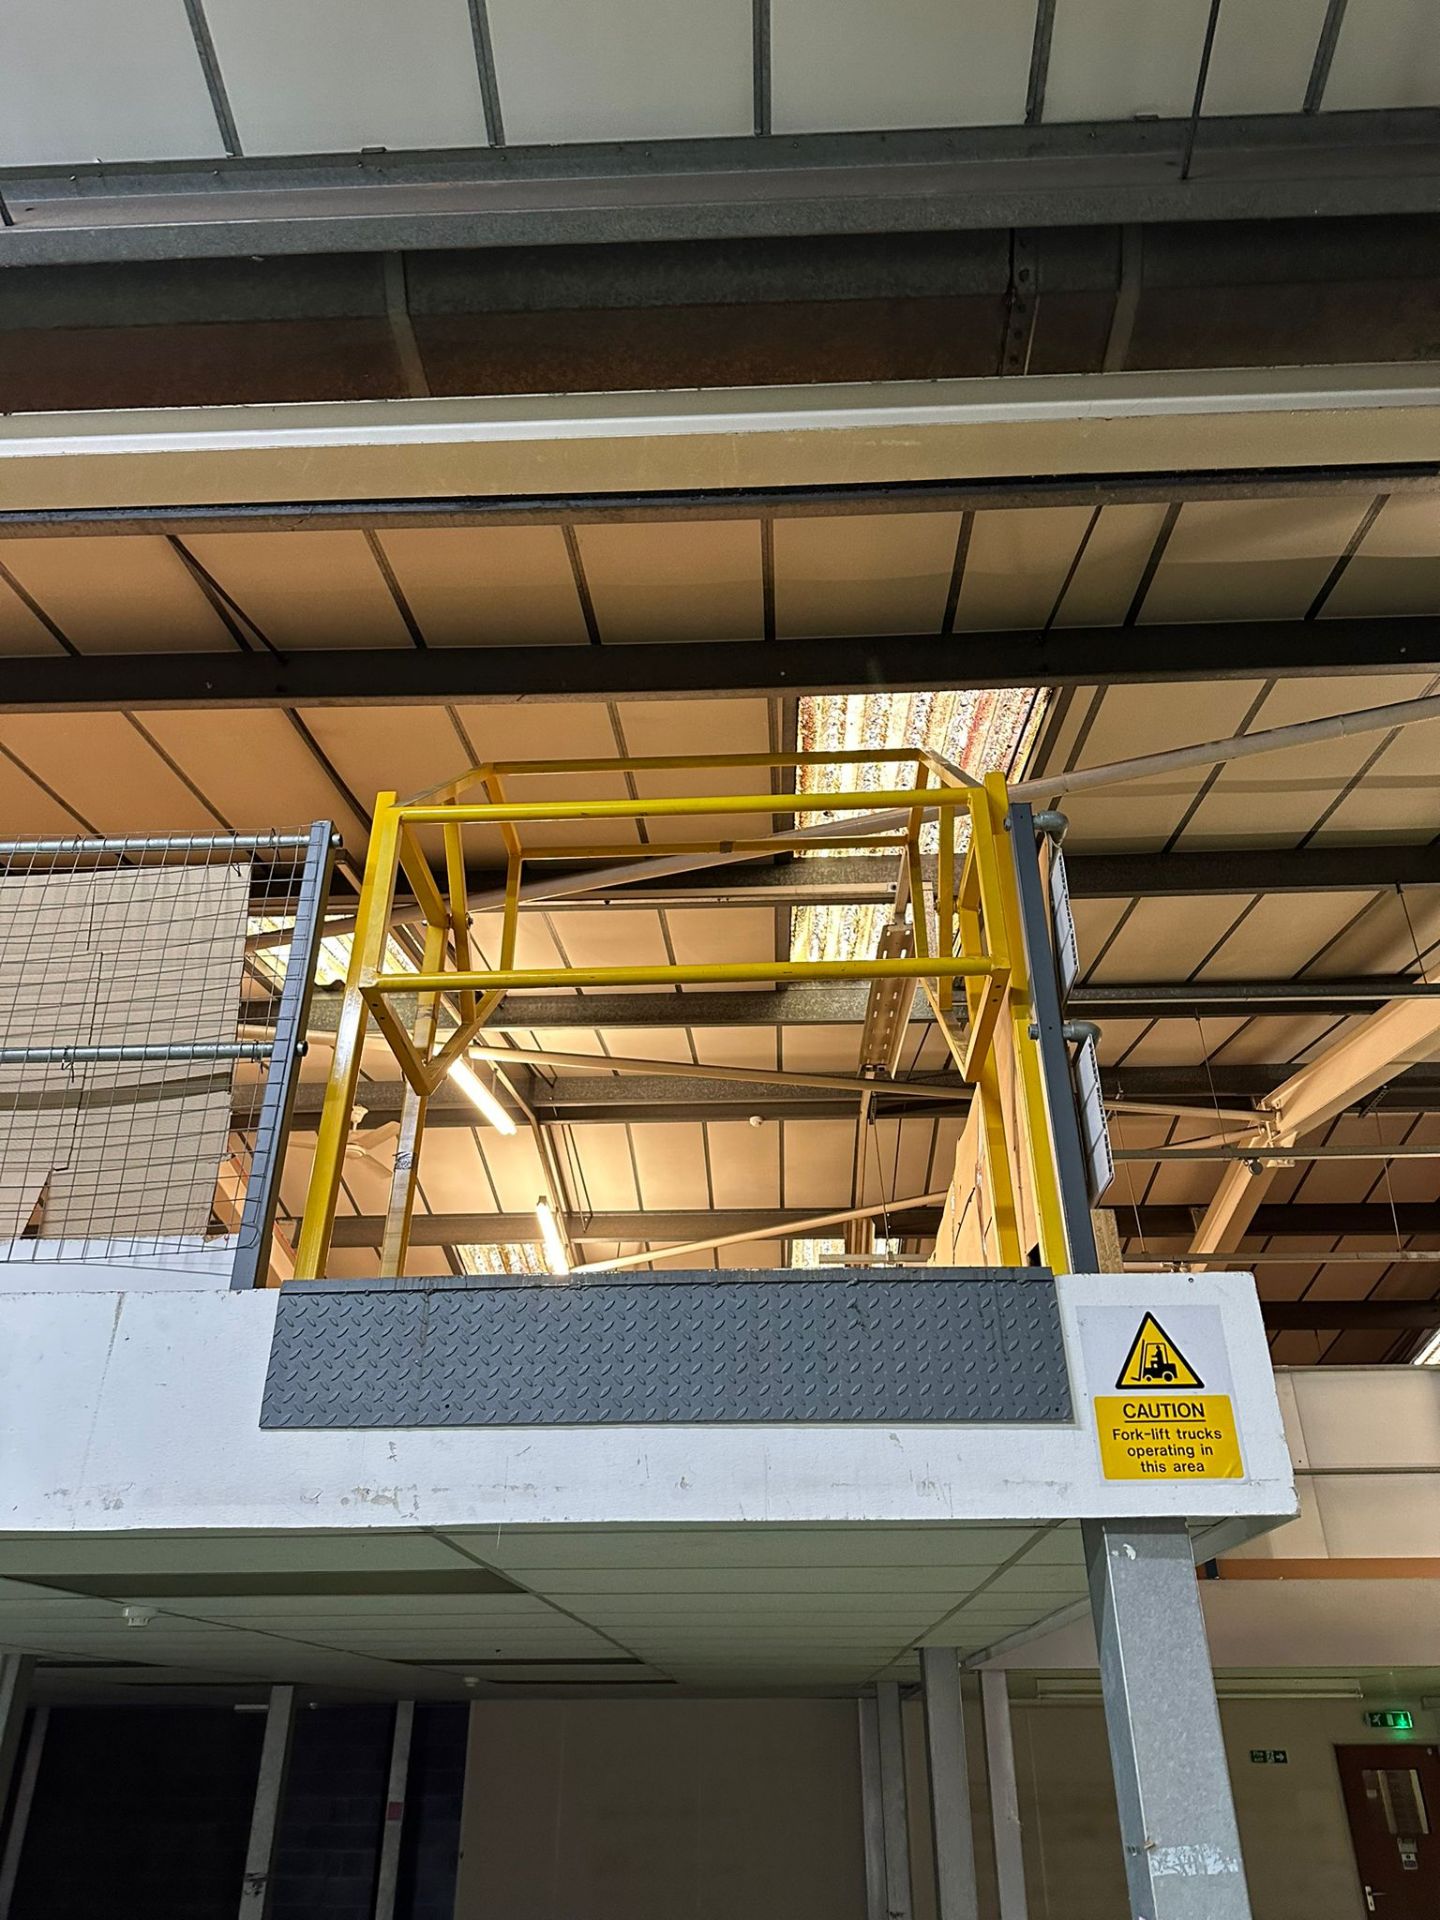 Mezzanine Floor - 498m2 - 2 Staircases, a Pallet Gate & Handrail - Image 5 of 7